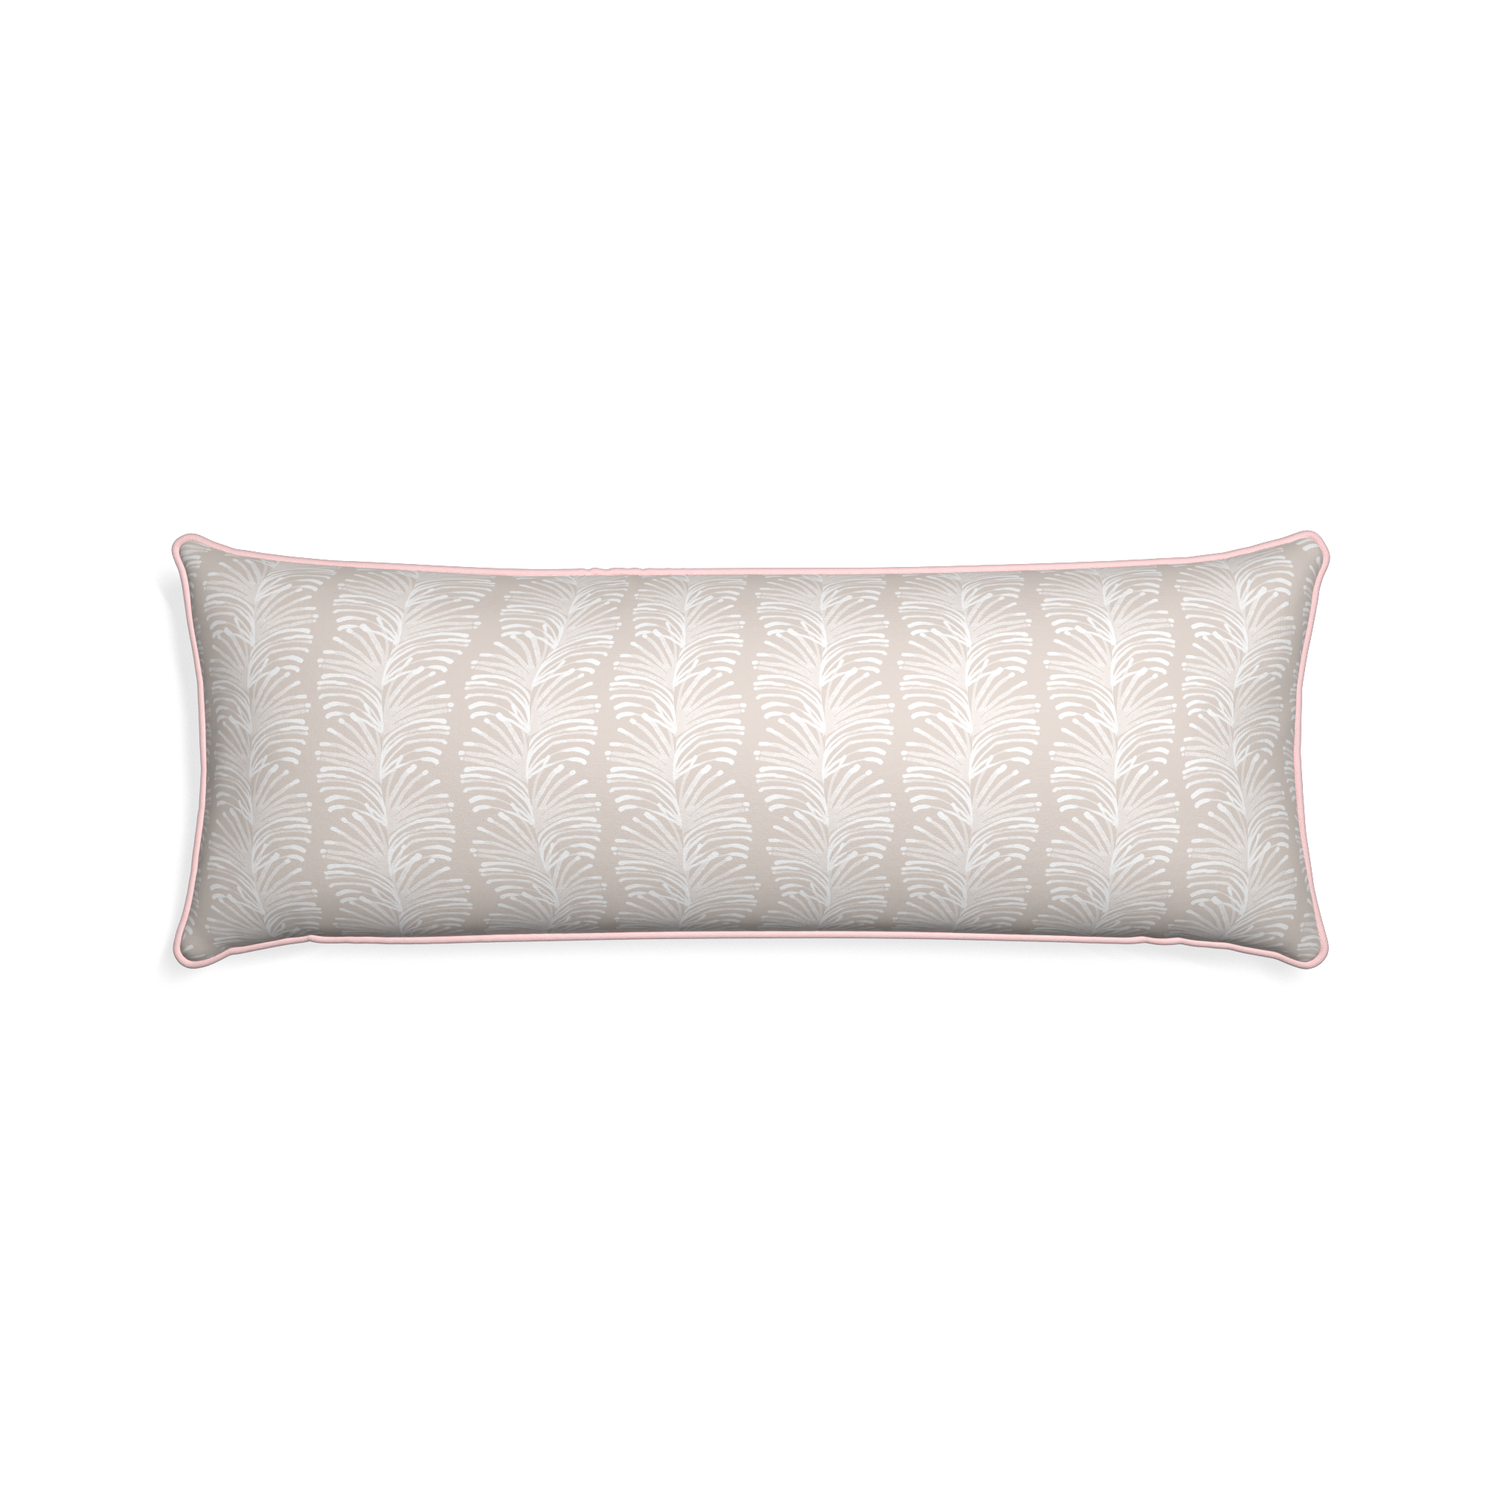 Xl-lumbar emma sand custom sand colored botanical stripepillow with petal piping on white background